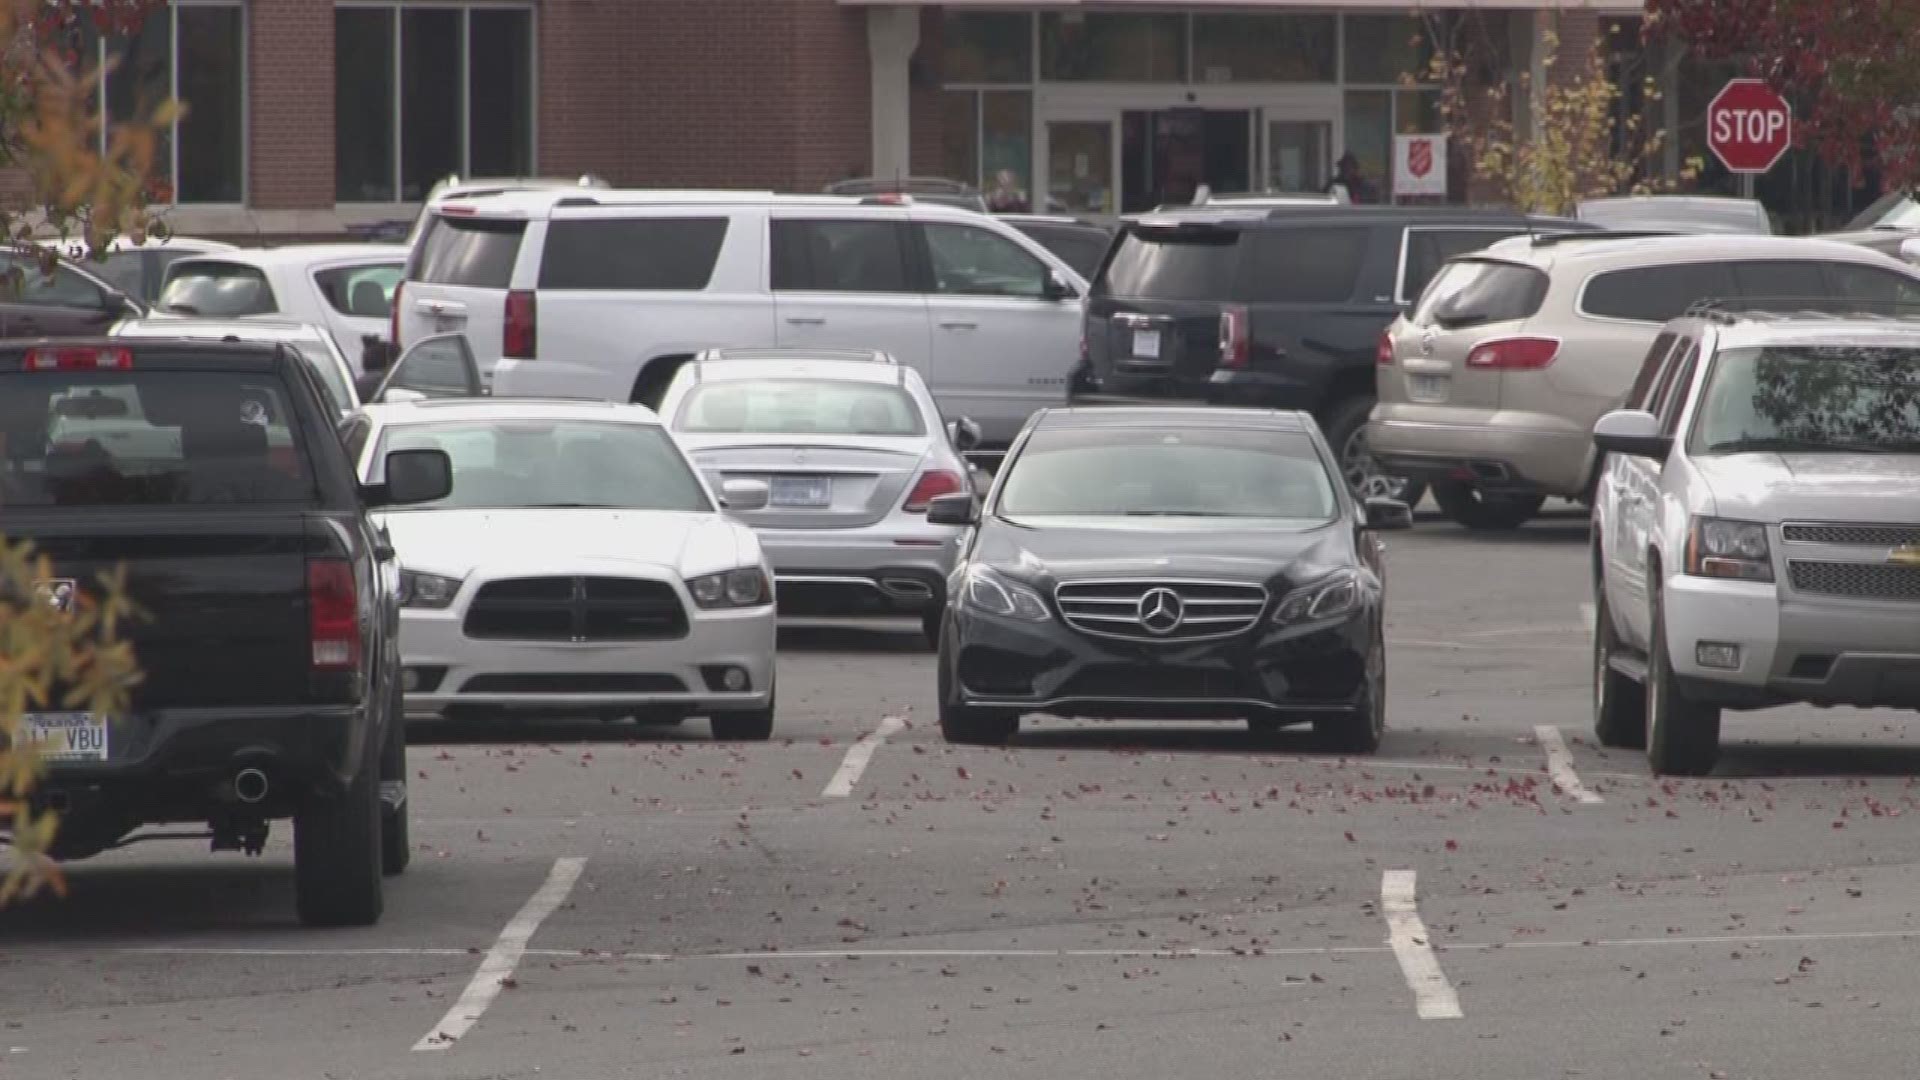 LRPD writes car theft risk report cards